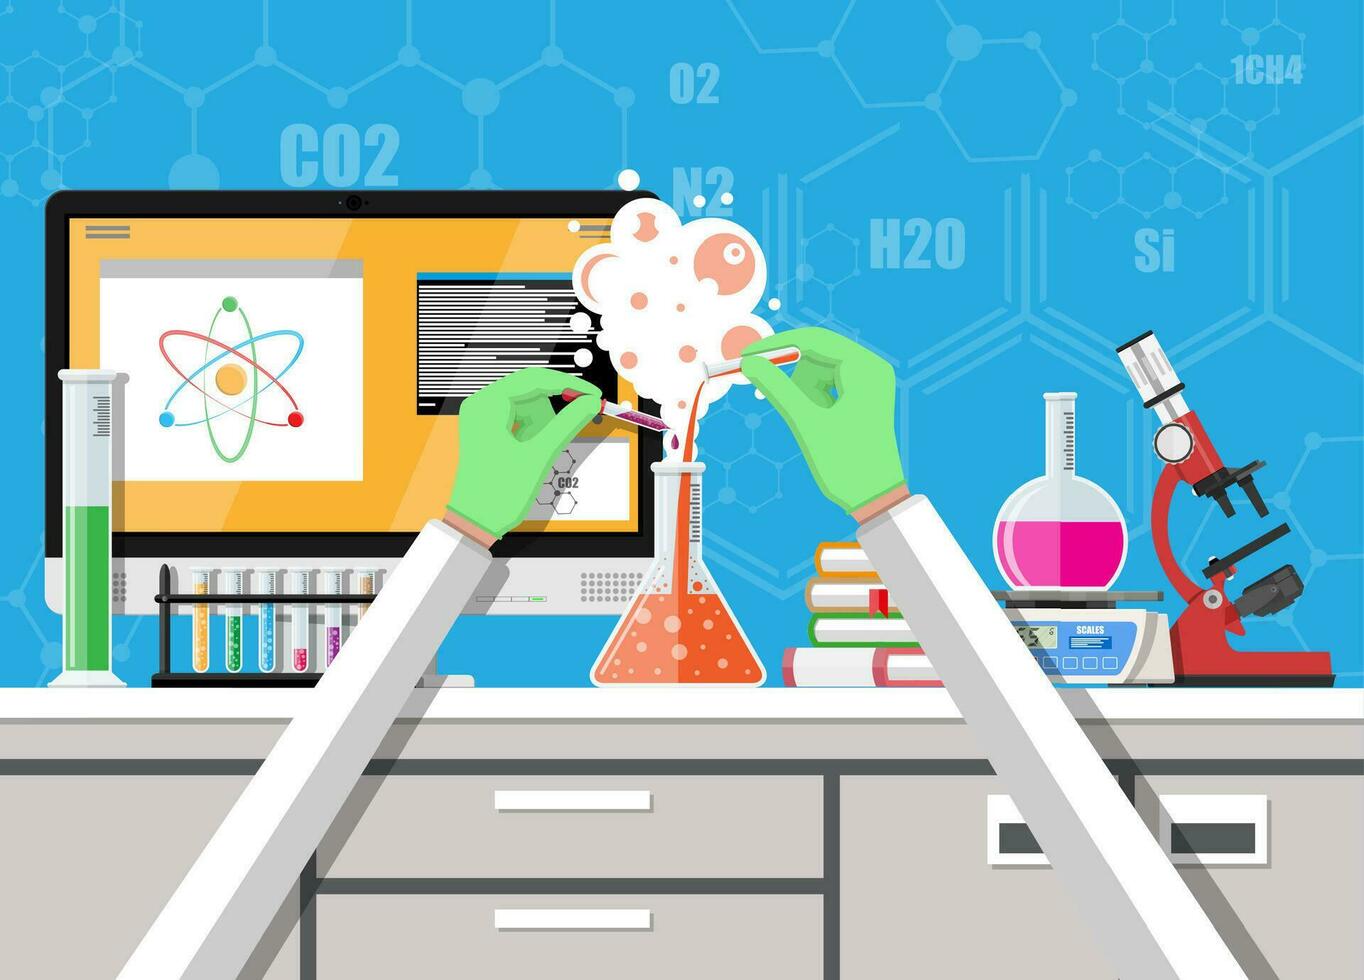 Laboratory equipment, jars, beakers, flasks, scales, microscope and pile of books. Computer with software. Biology science education medical. Vector illustration in flat style